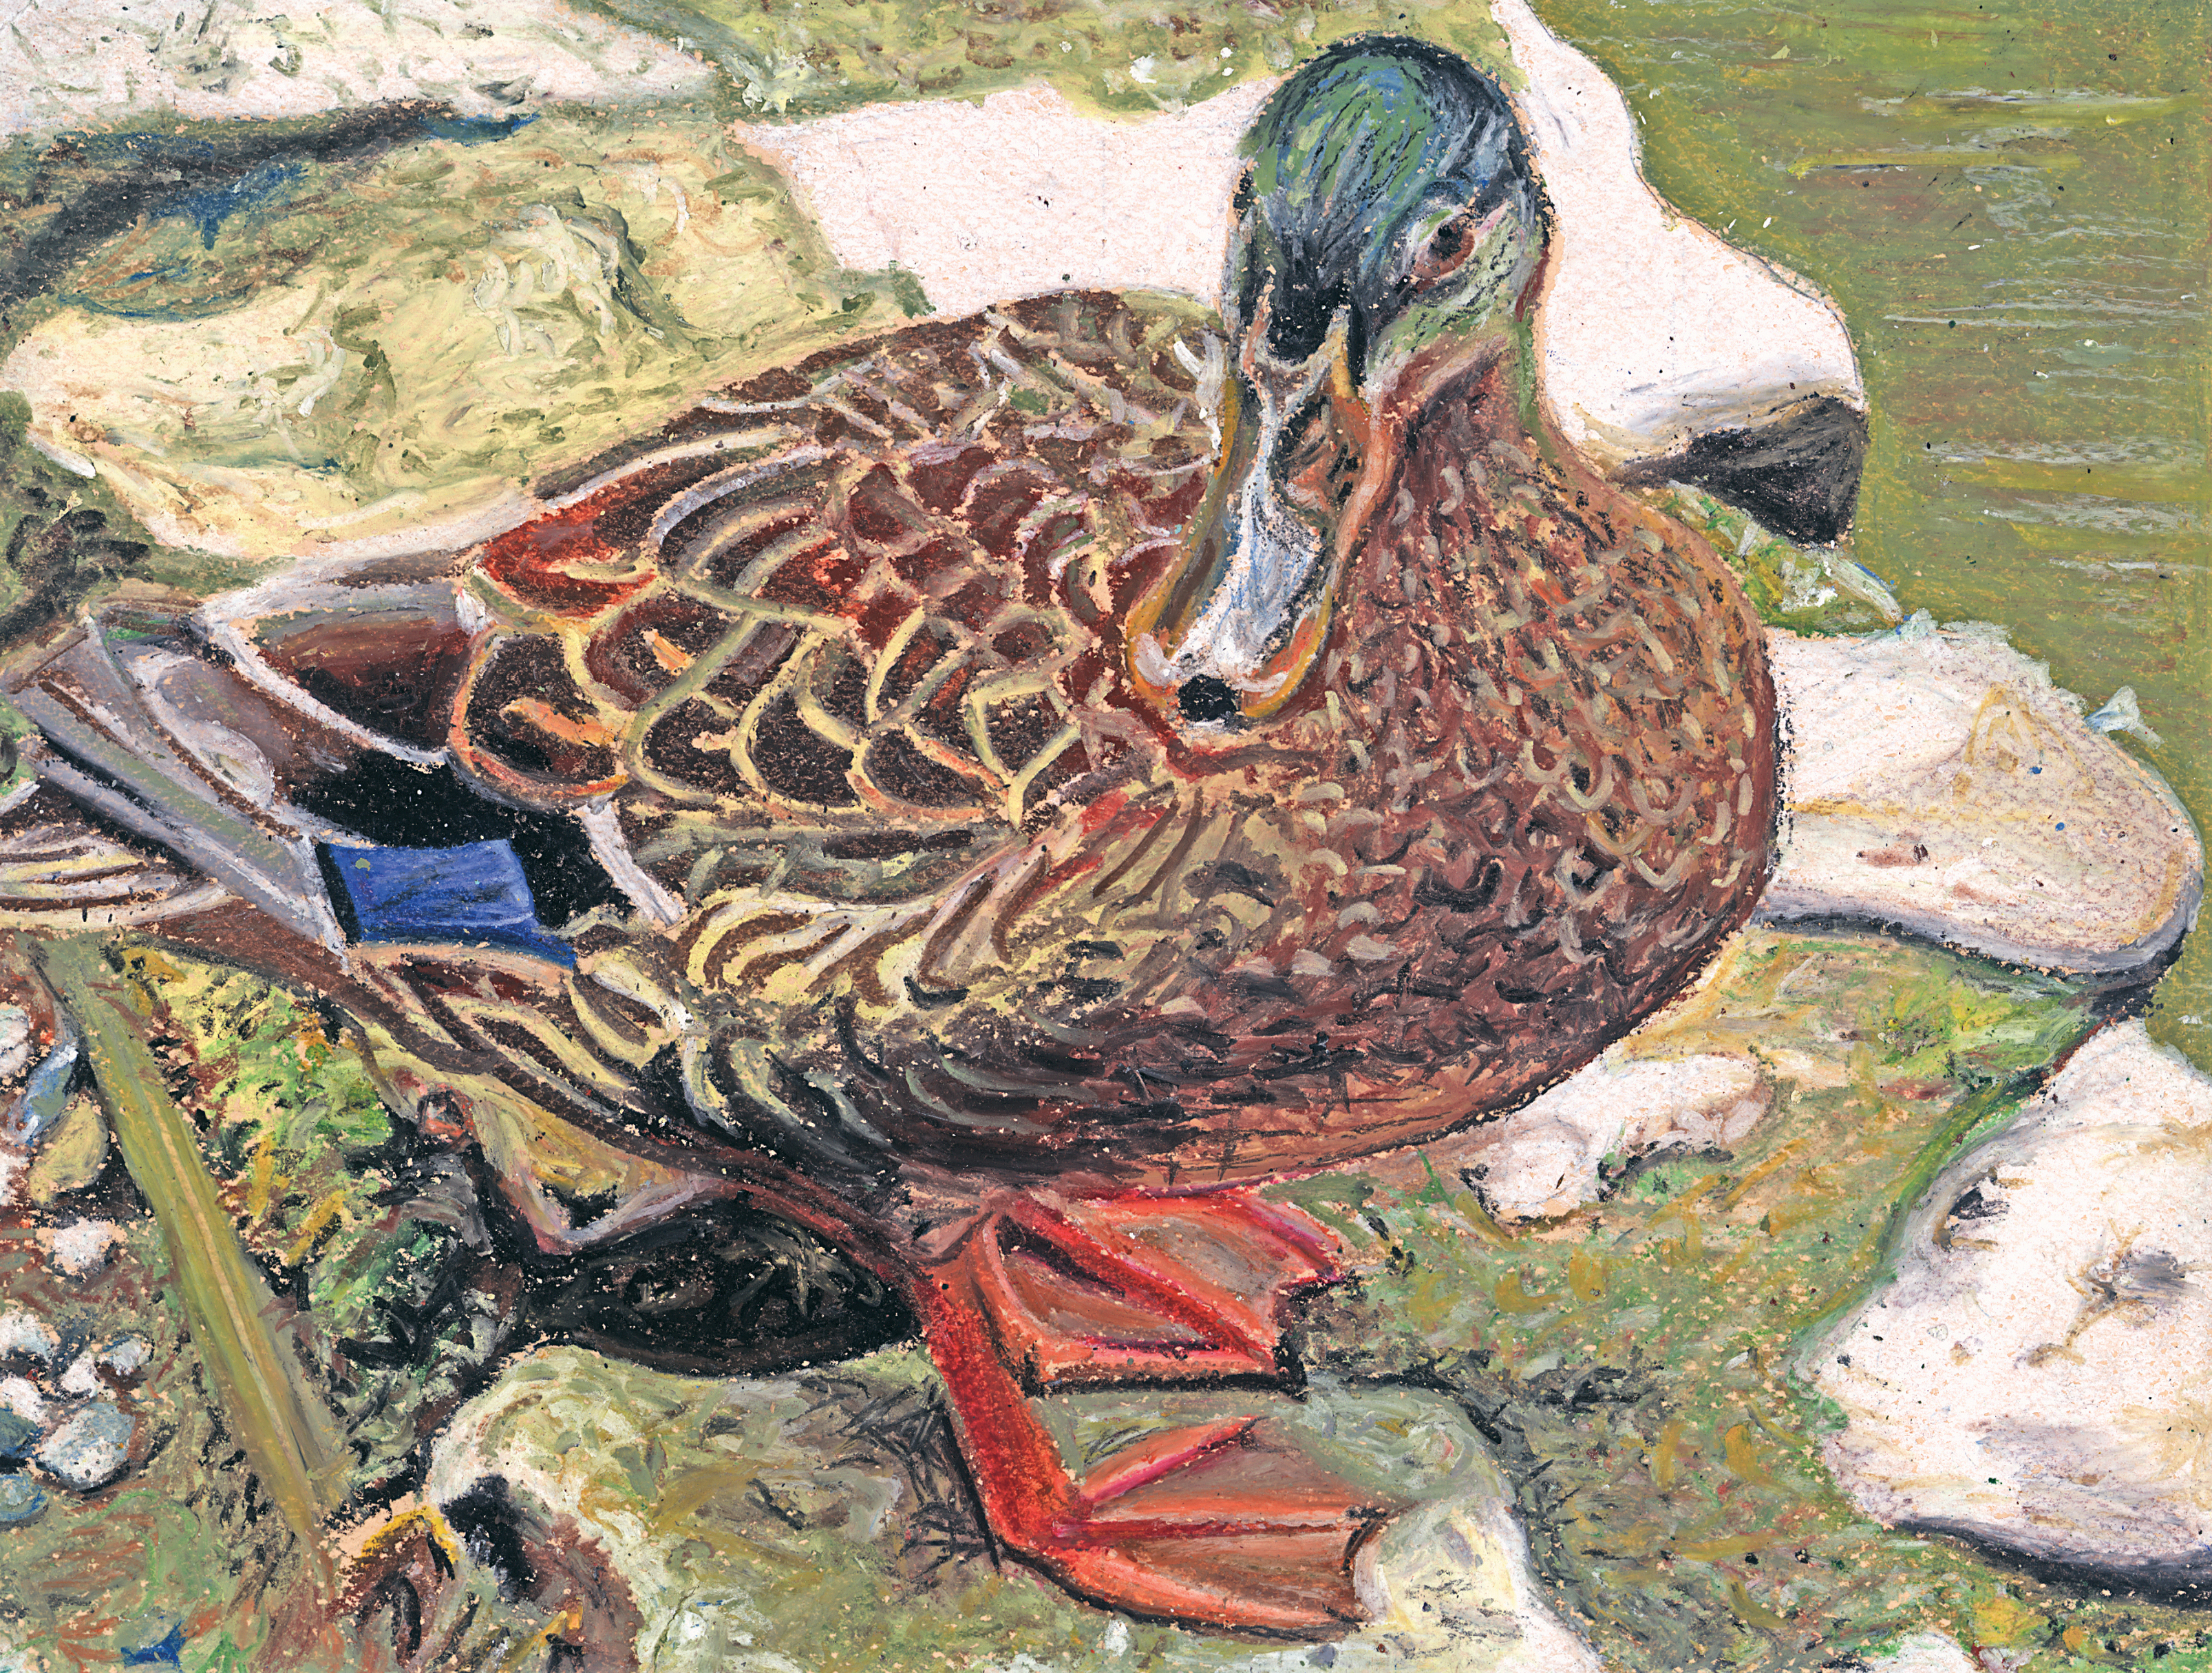 The finalist from Massachusetts for the 2011 Junior Duck Stamp Art Contest. (5610357418)